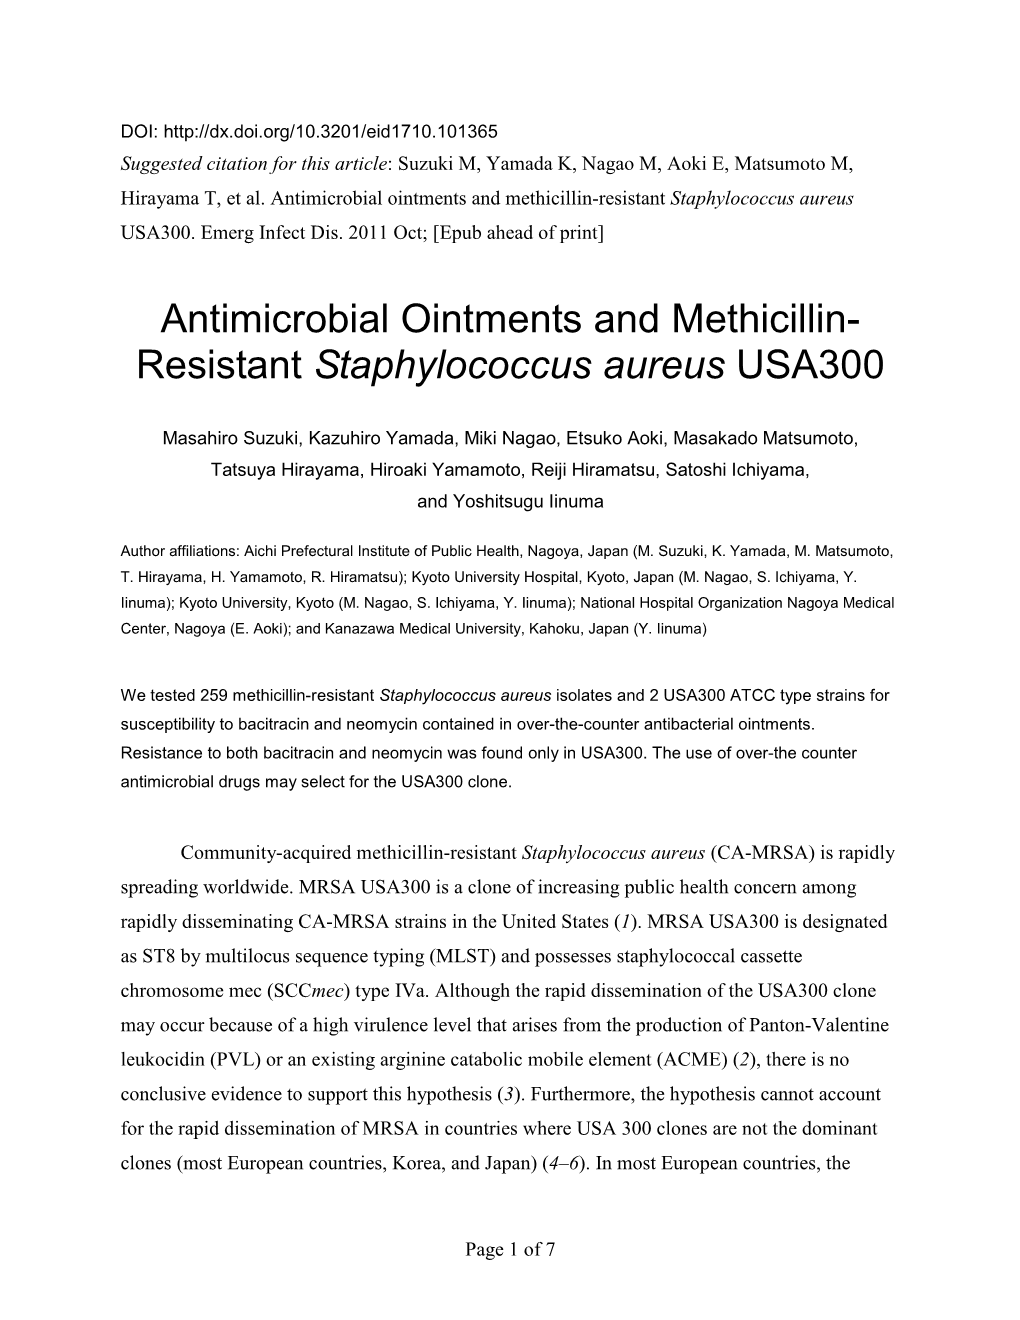 Antimicrobial Ointments and Methicillin-Resistant Staphylococcus Aureus USA300